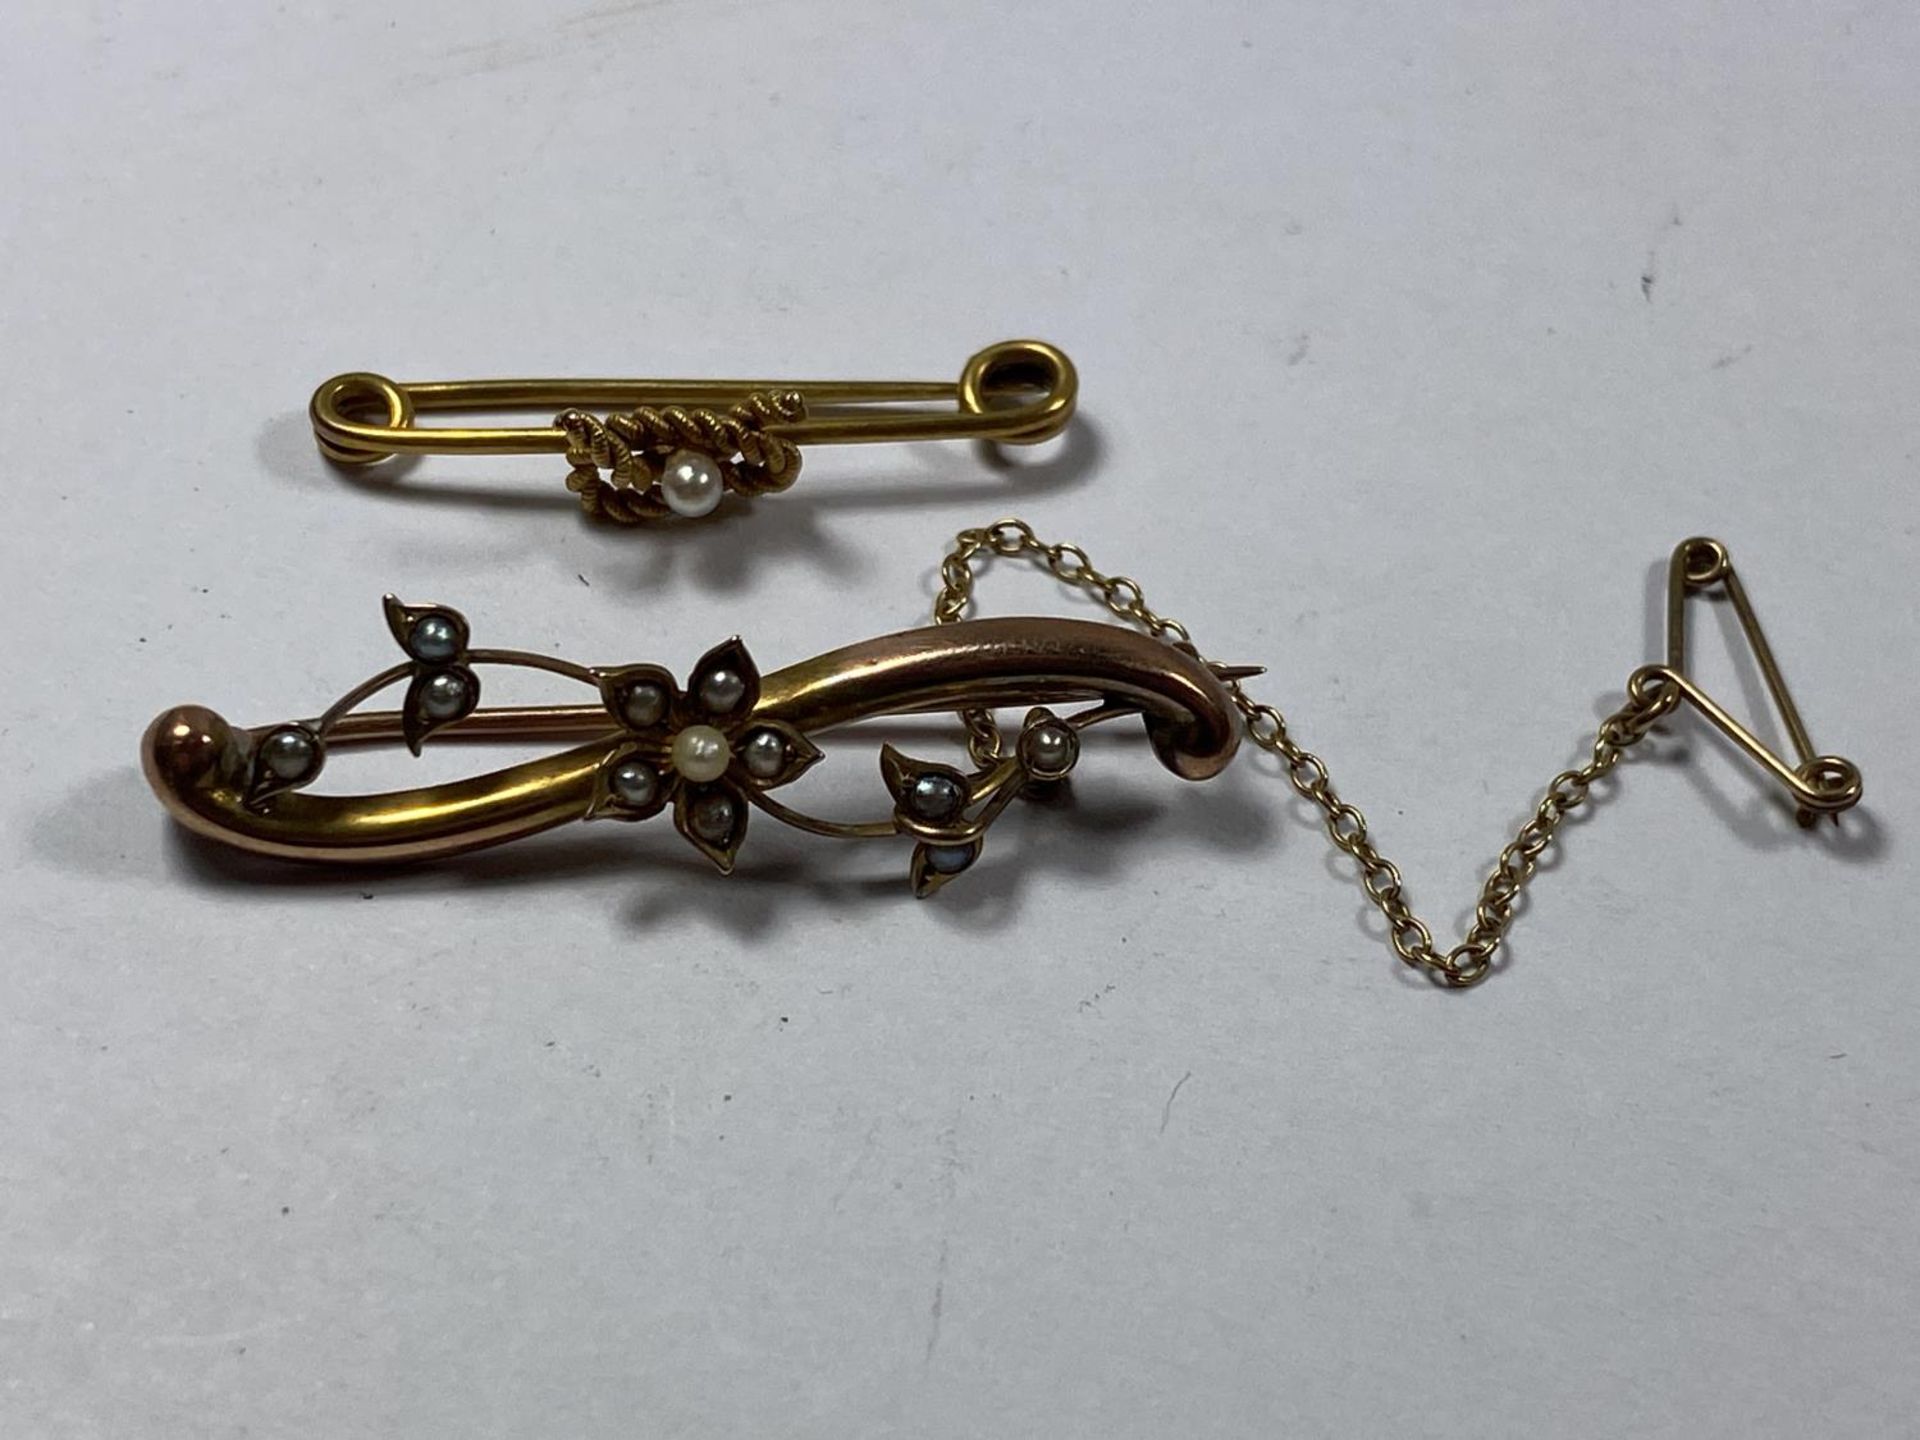 A 9CT YELLOW GOLD FLORAL BROOCH & FURTHER UNMARKED KNOT DESIGN BROOCH, GOLD BROOCH WEIGHT 2.5G - Image 2 of 6